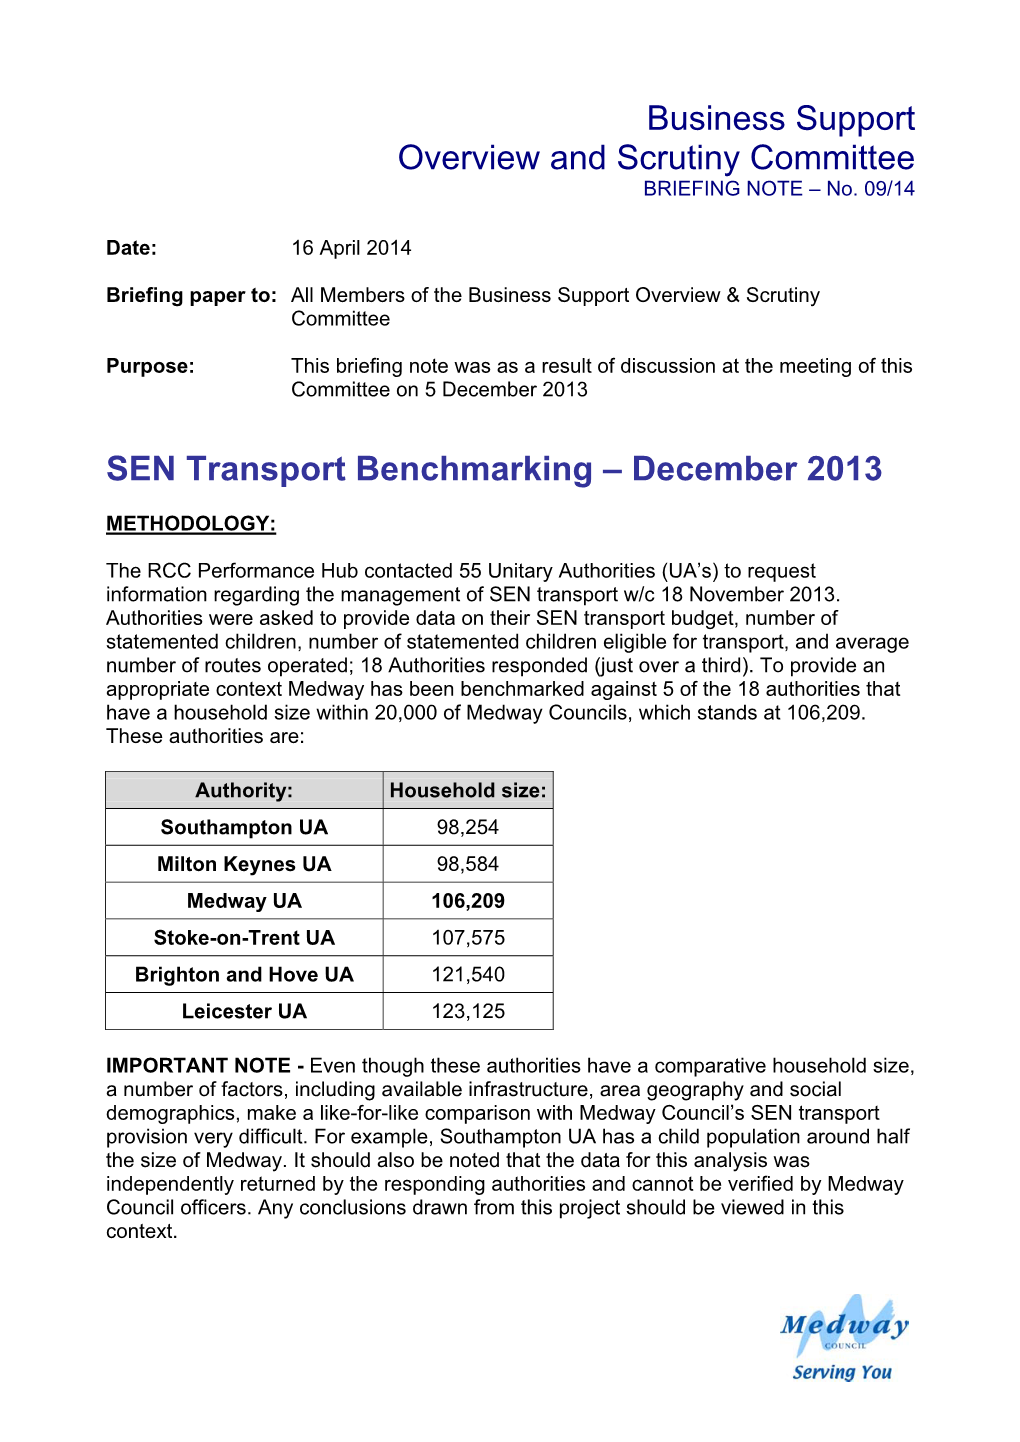 Business Support Overview and Scrutiny Committee SEN Transport Benchmarking – December 2013